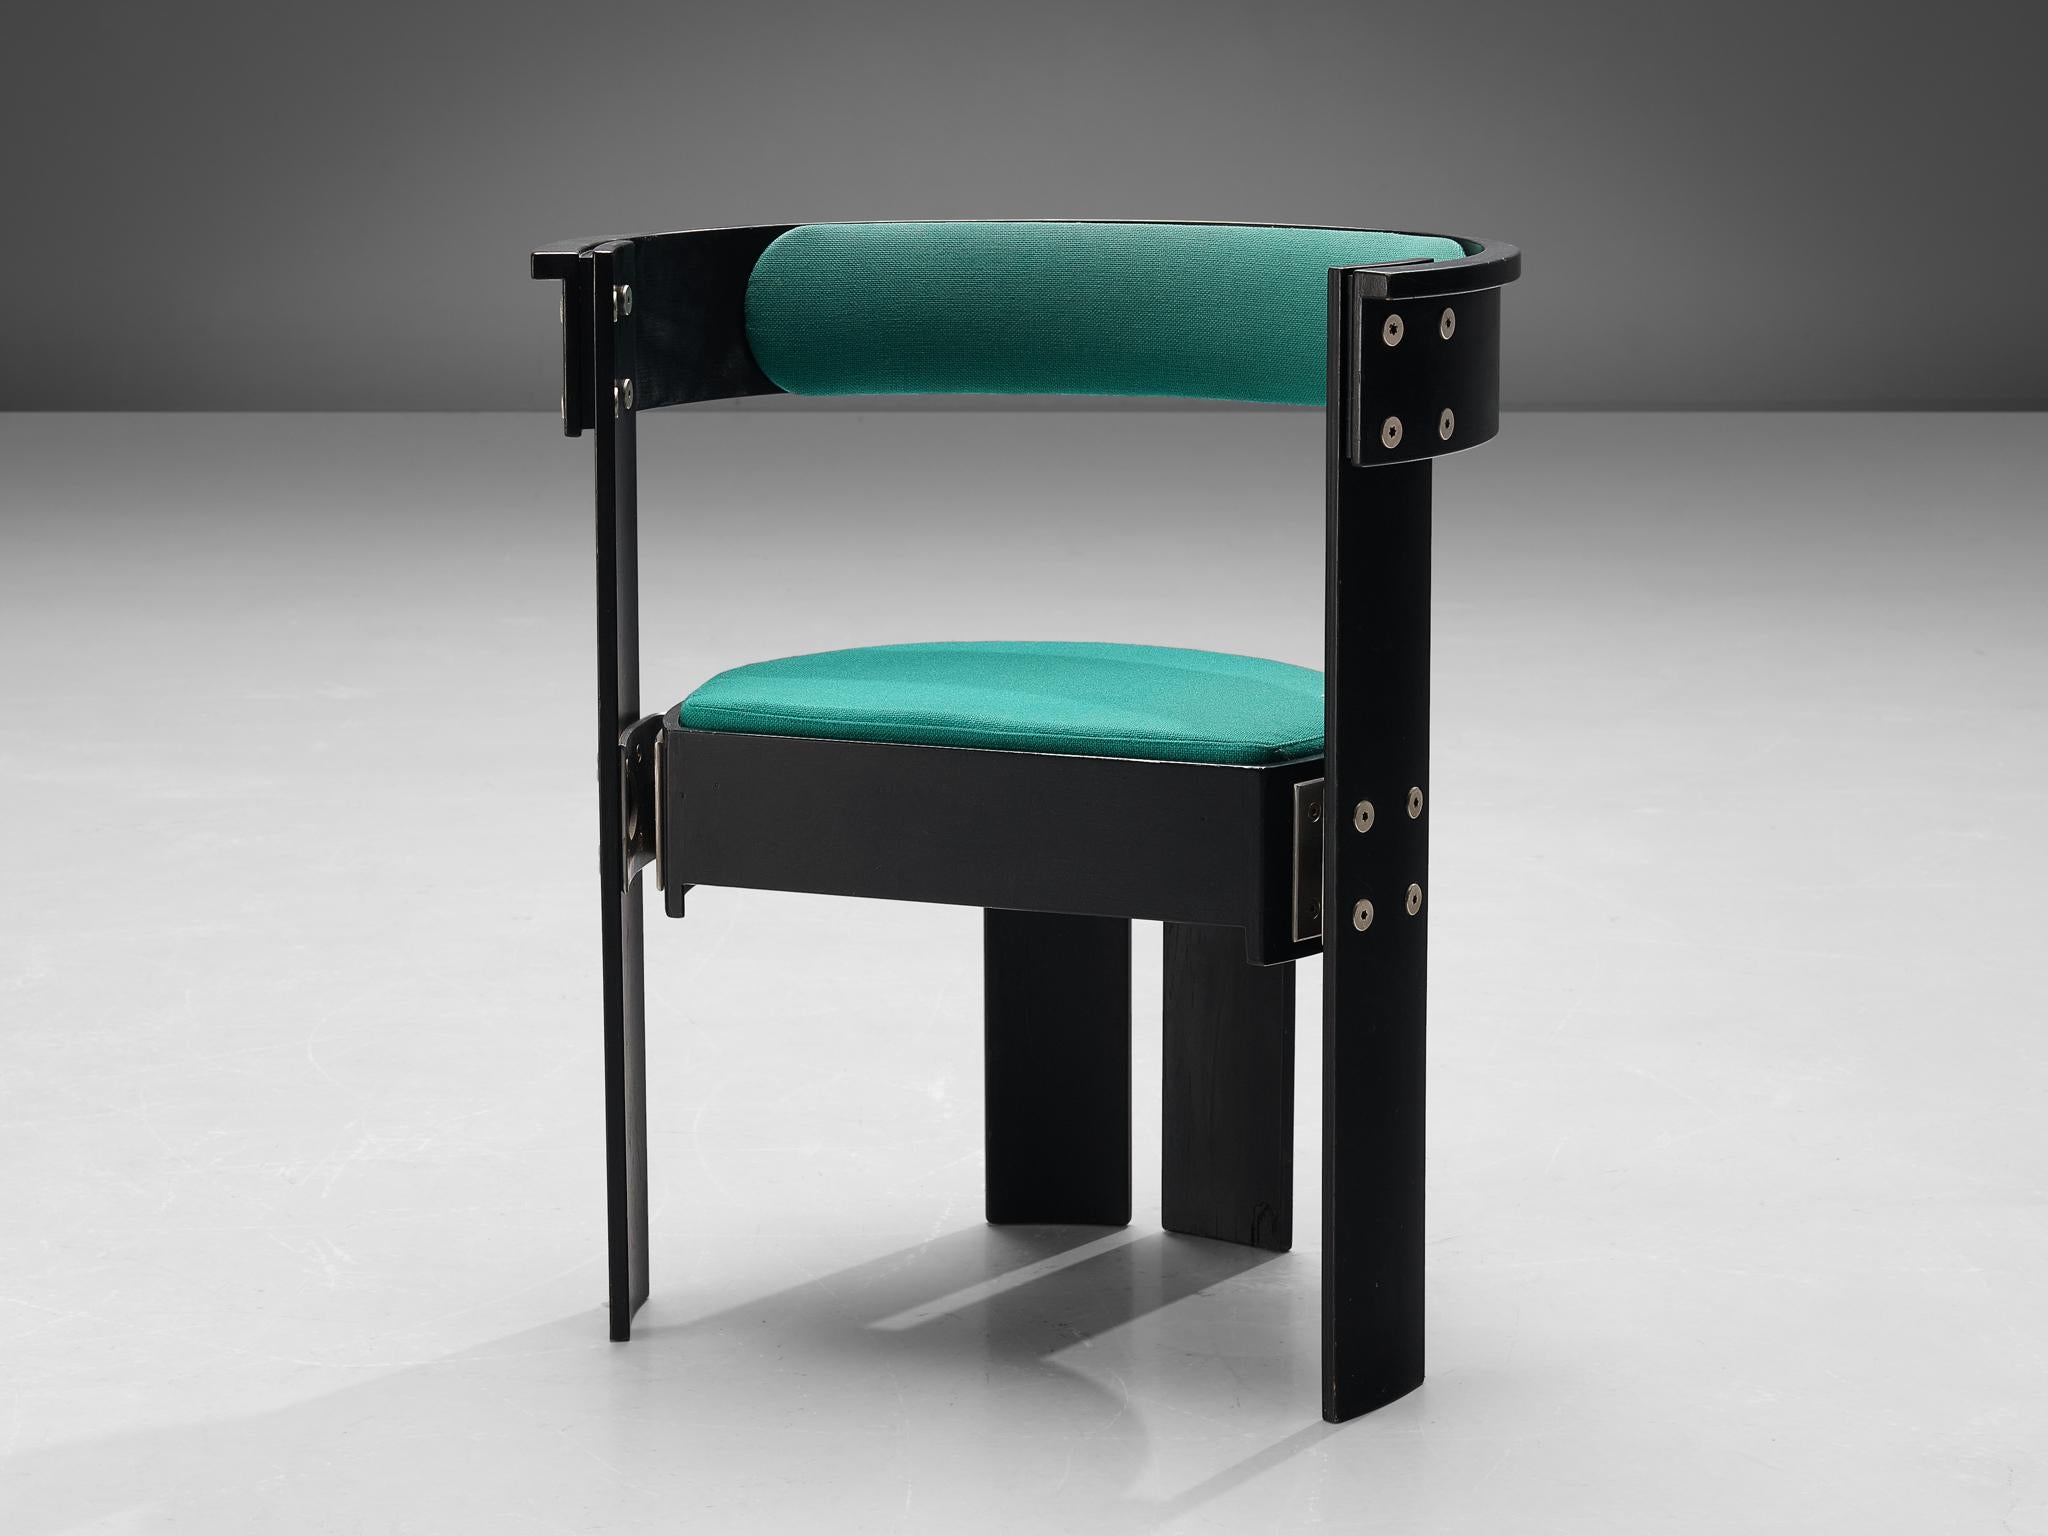 Tarquini Mårtensson, Michael Tarp Jensen, armchair, black lacquered plywood, metal, wool, Denmark, 1974

This dining chair was designed by Danish architects Tarquini Mårtensson and Michael Tarp Jensen for Idrættens Hus ('House of Sports'). This